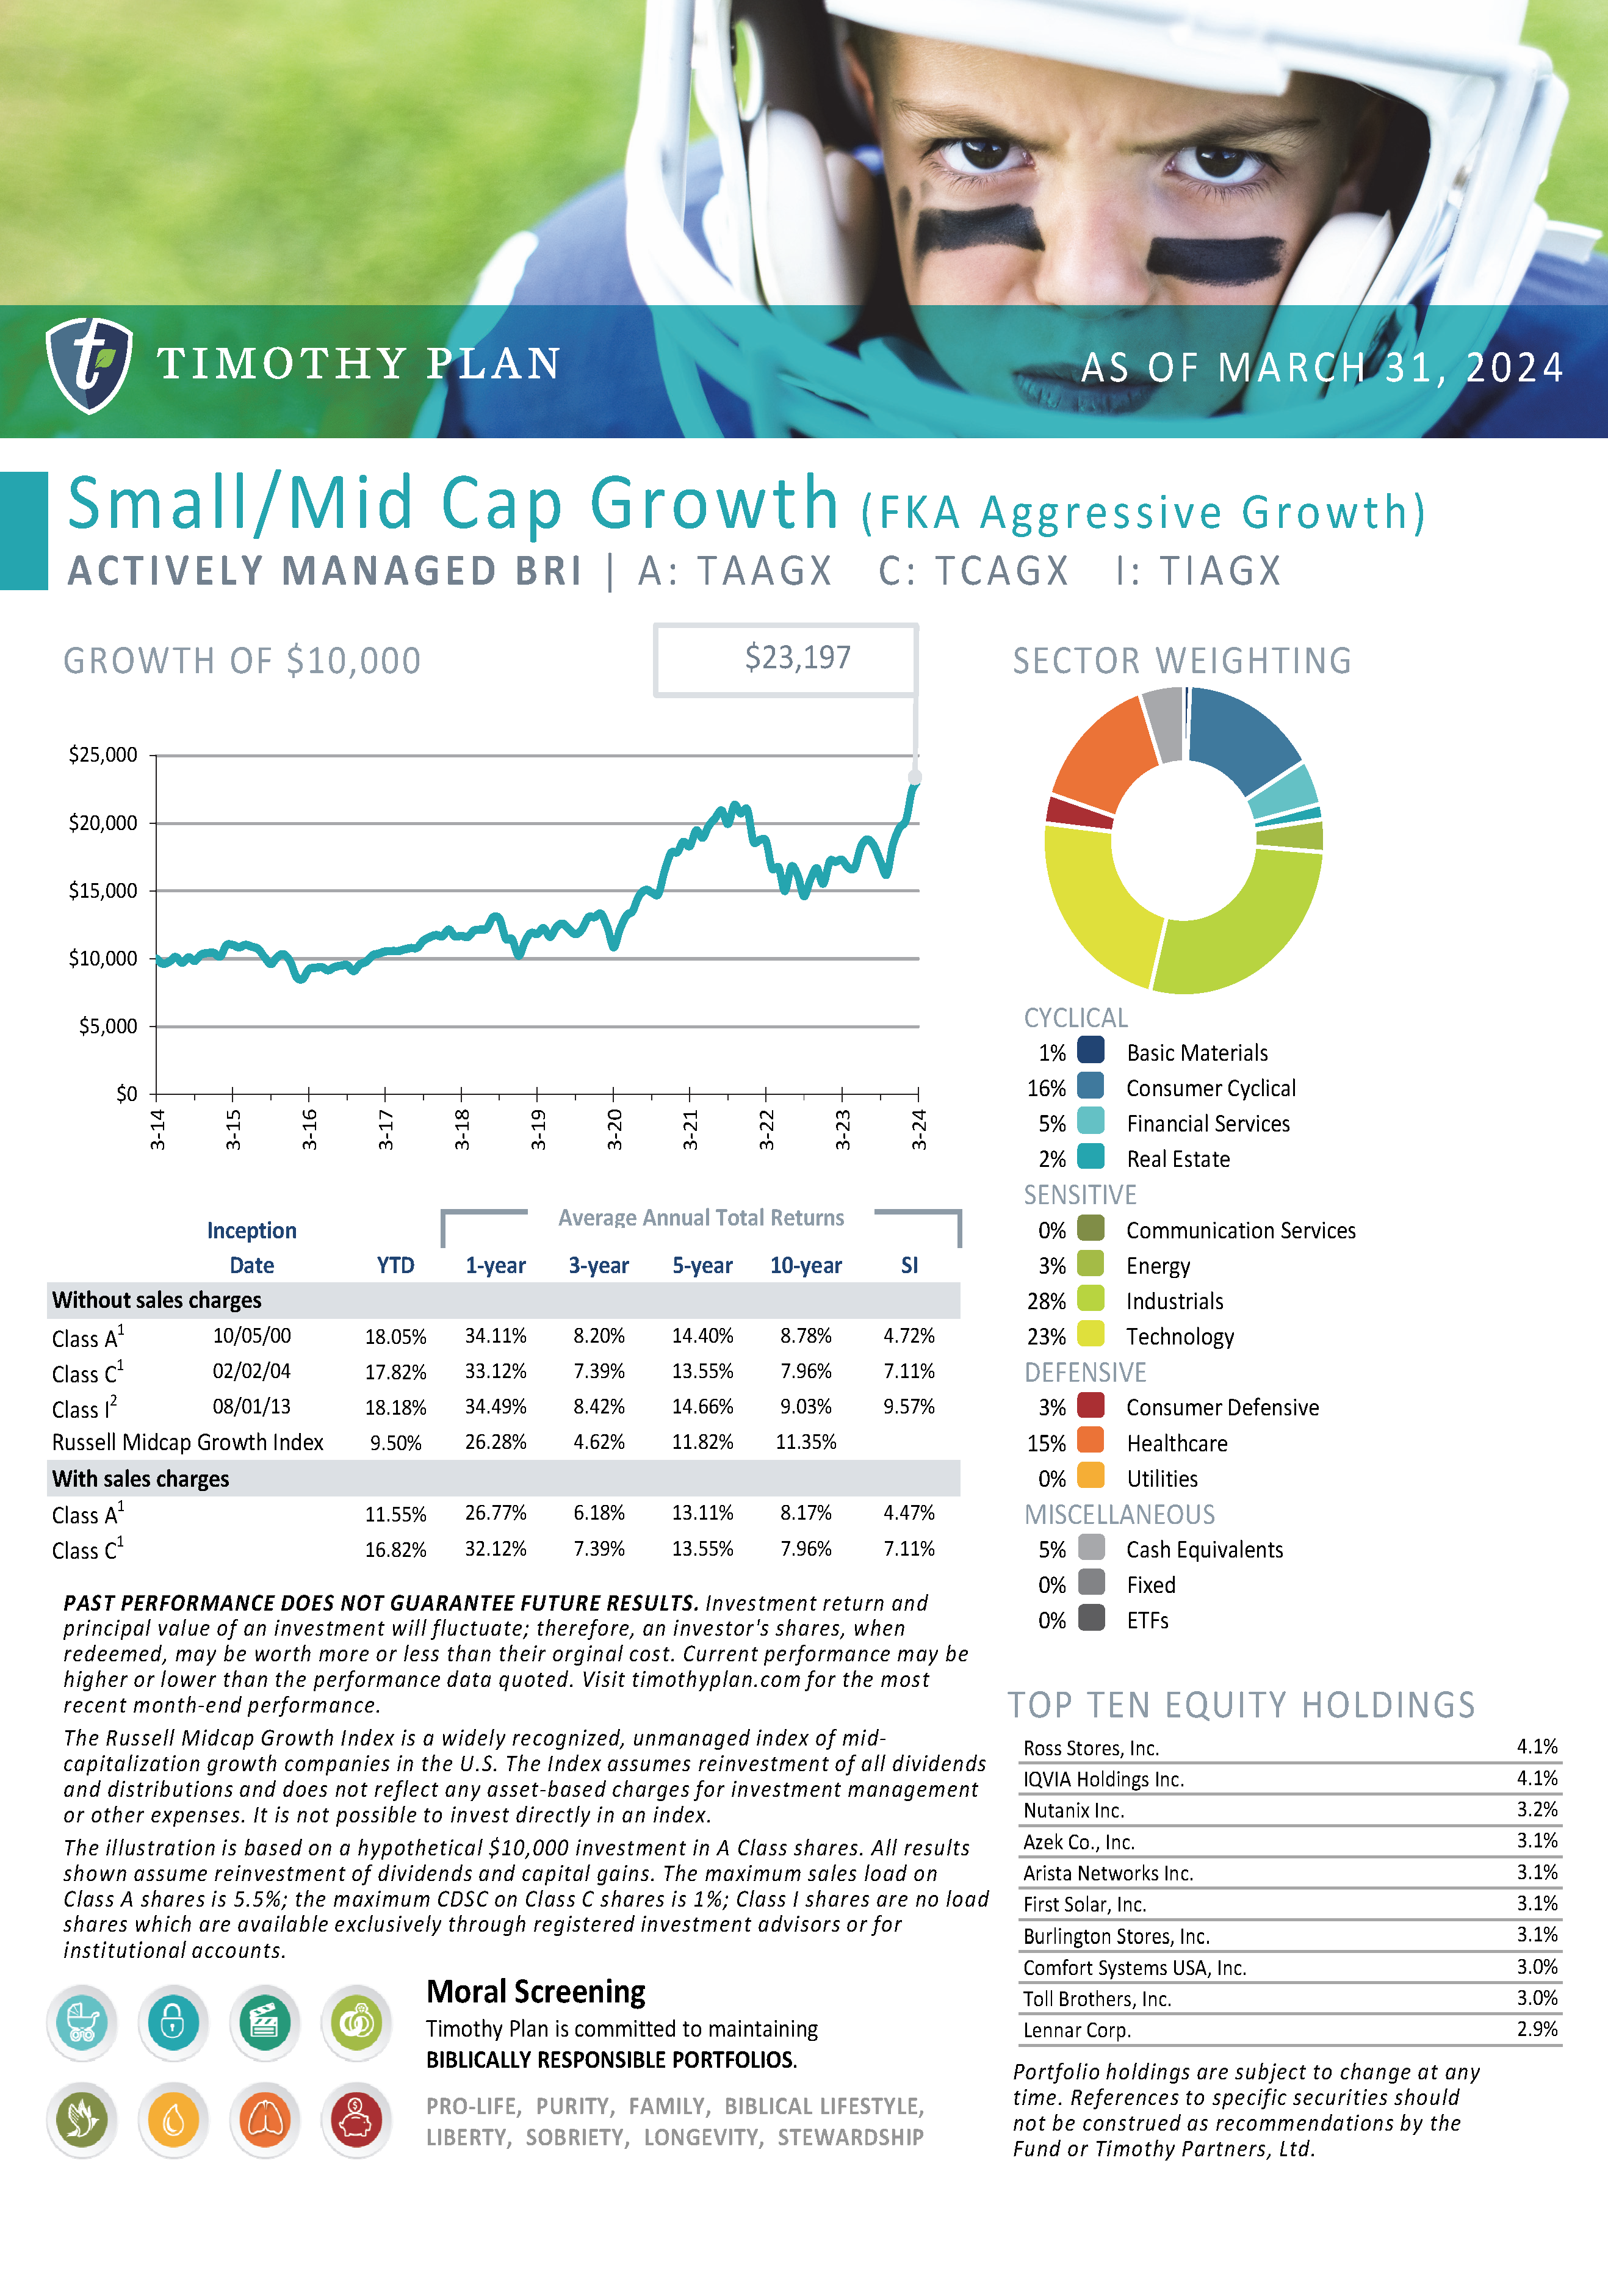 Small/Mid Cap Growth (FKA Aggressive Growth) page 7